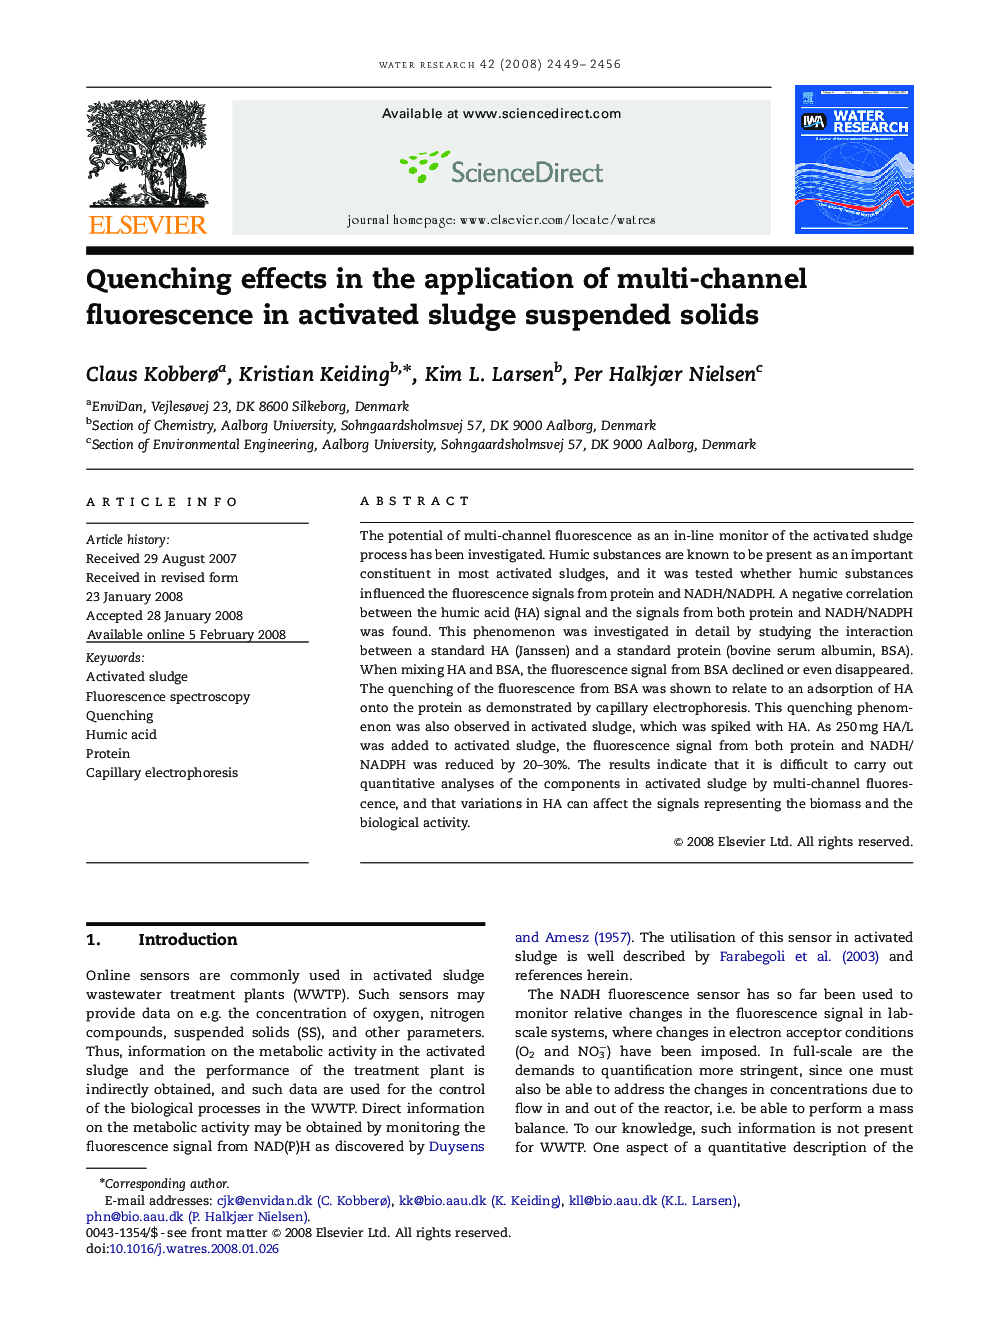 Quenching effects in the application of multi-channel fluorescence in activated sludge suspended solids